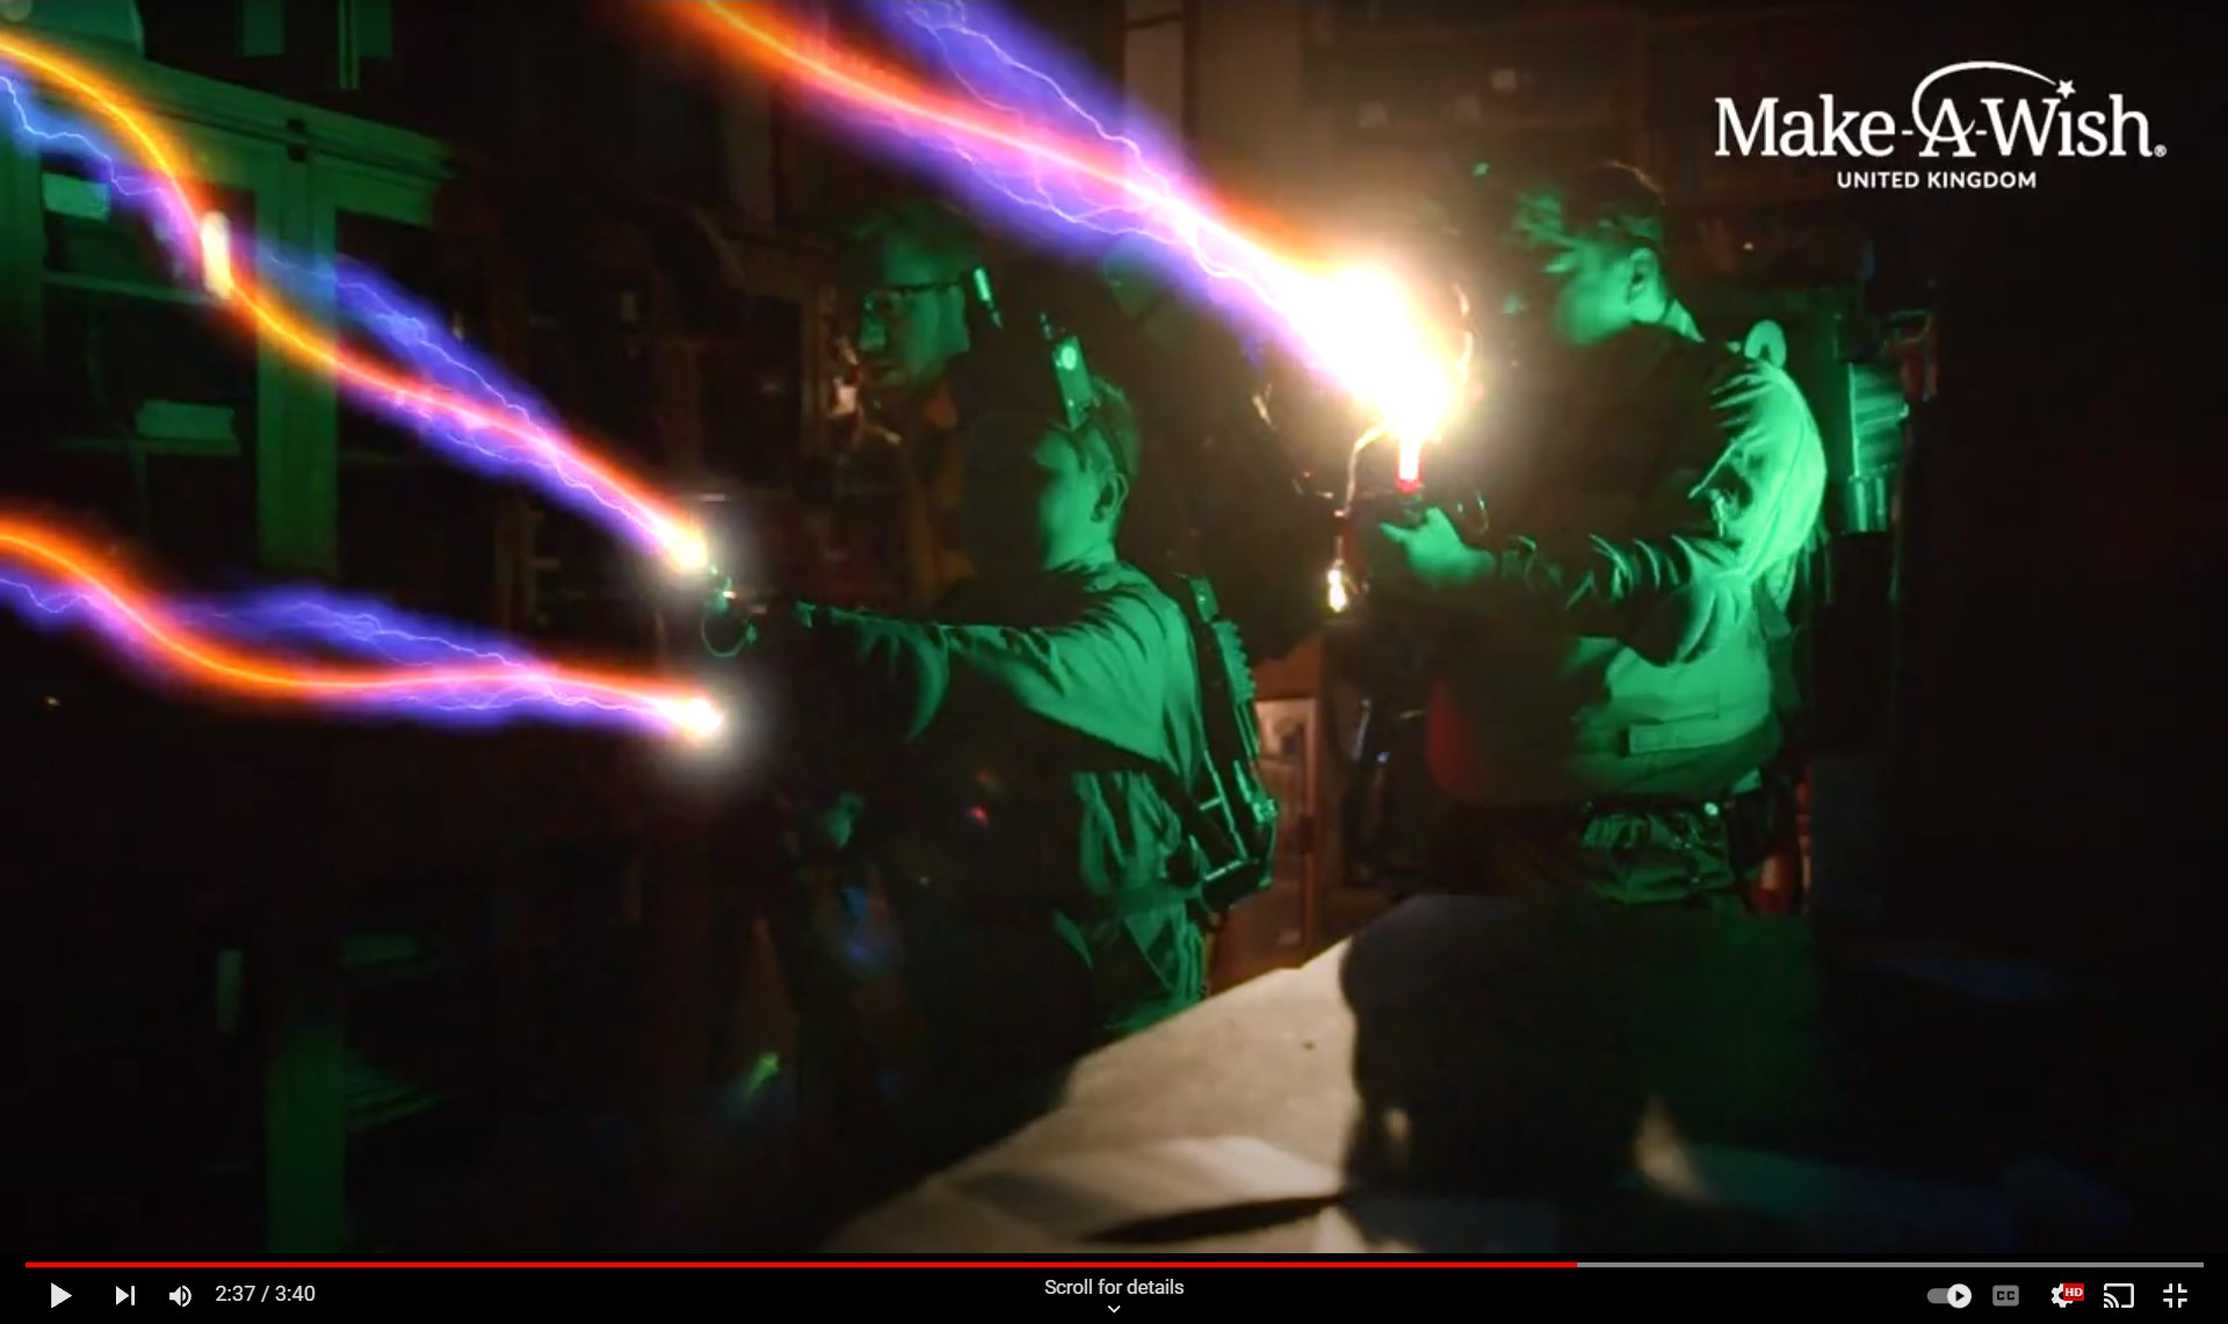 A still from the film of George's wish, showing him firing a proton beam from his Proton Pack.